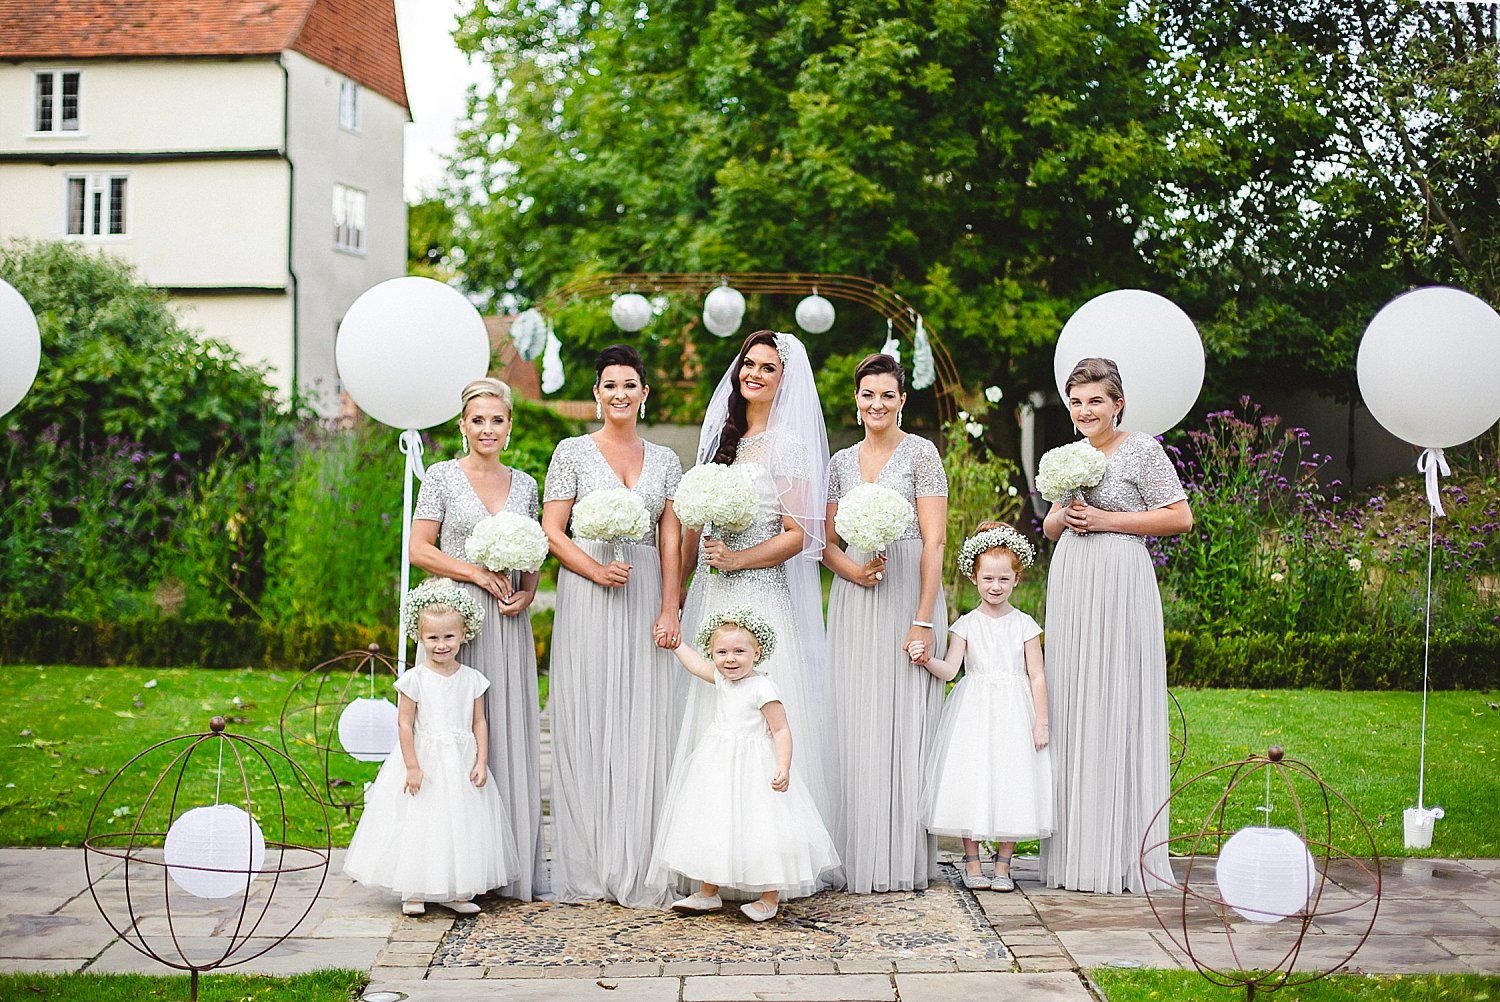 Houchins Wedding Photographer - Bridal Party in the Gardens